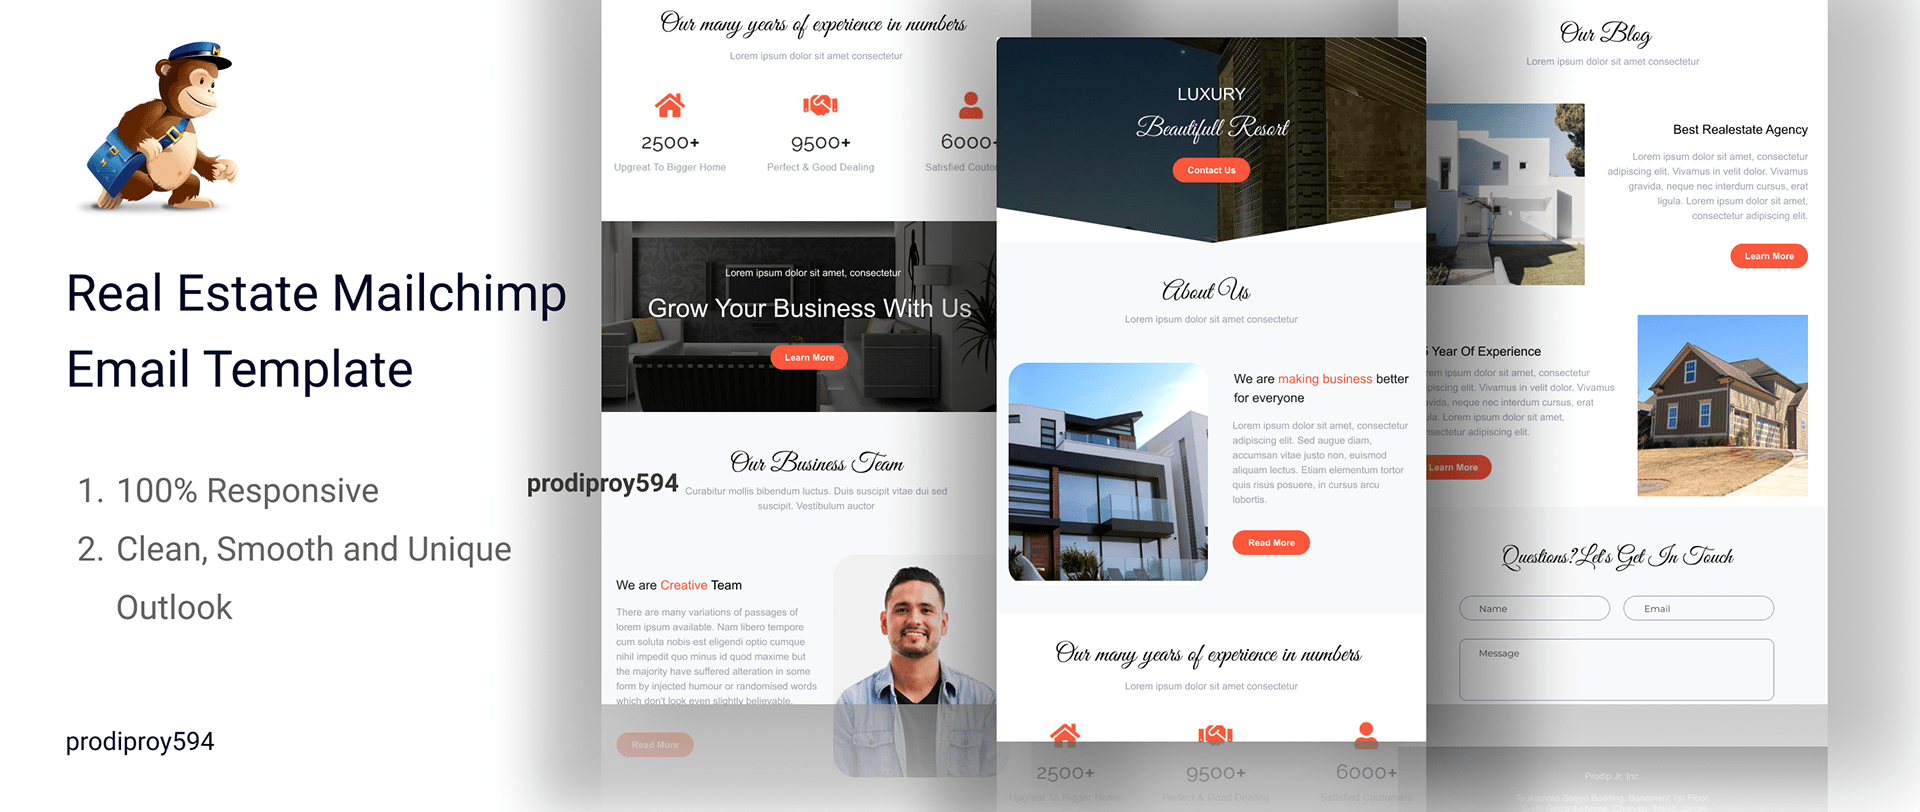 real-estate-mailchimp-email-template-on-behance